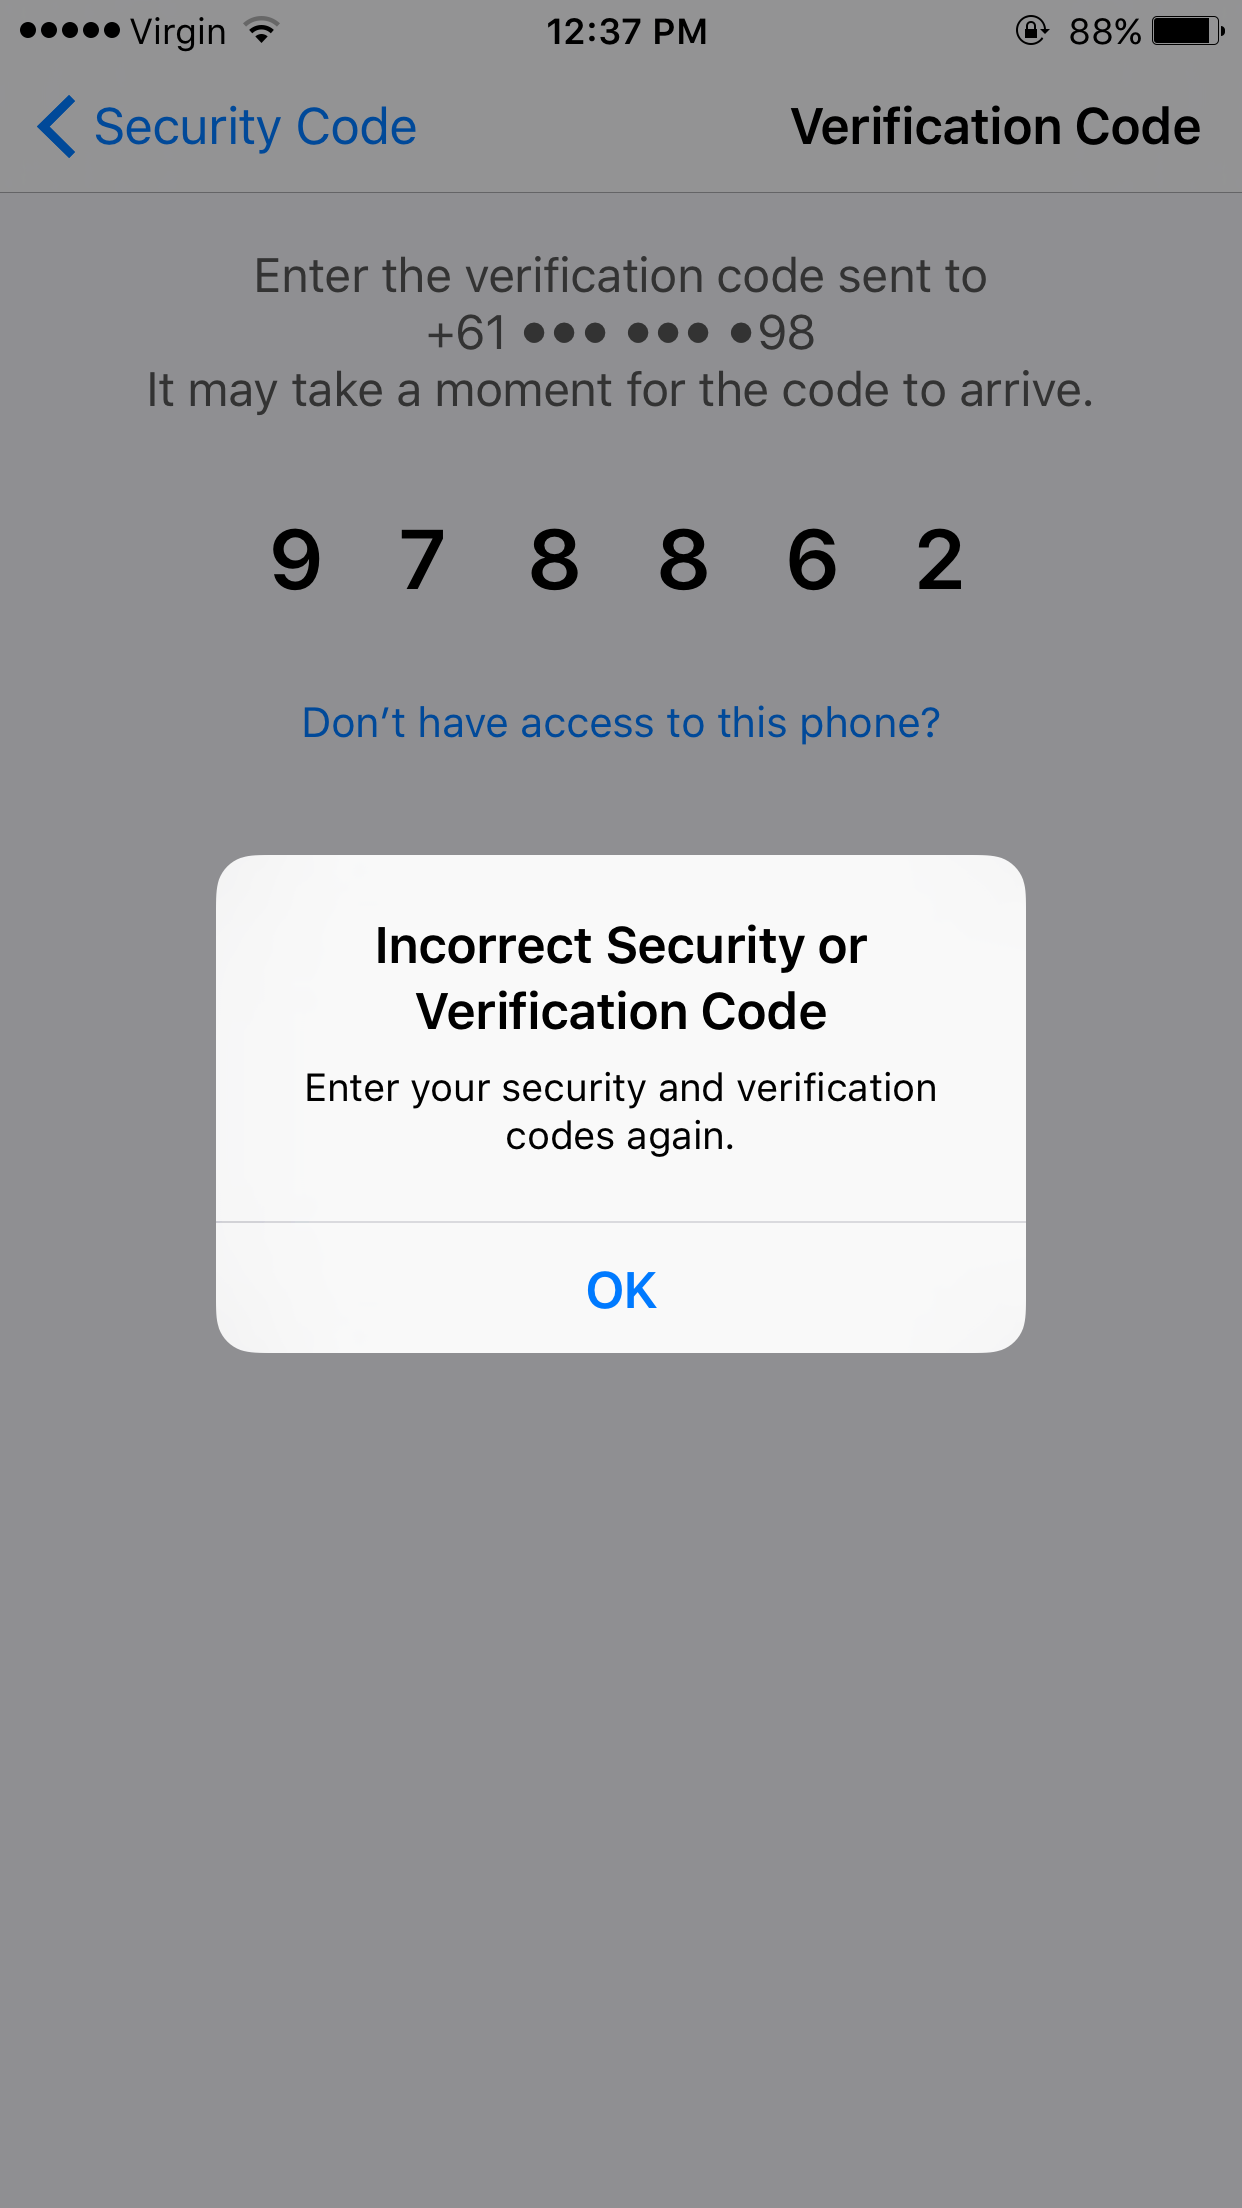 Incorrect Security or Verification Code Apple Community